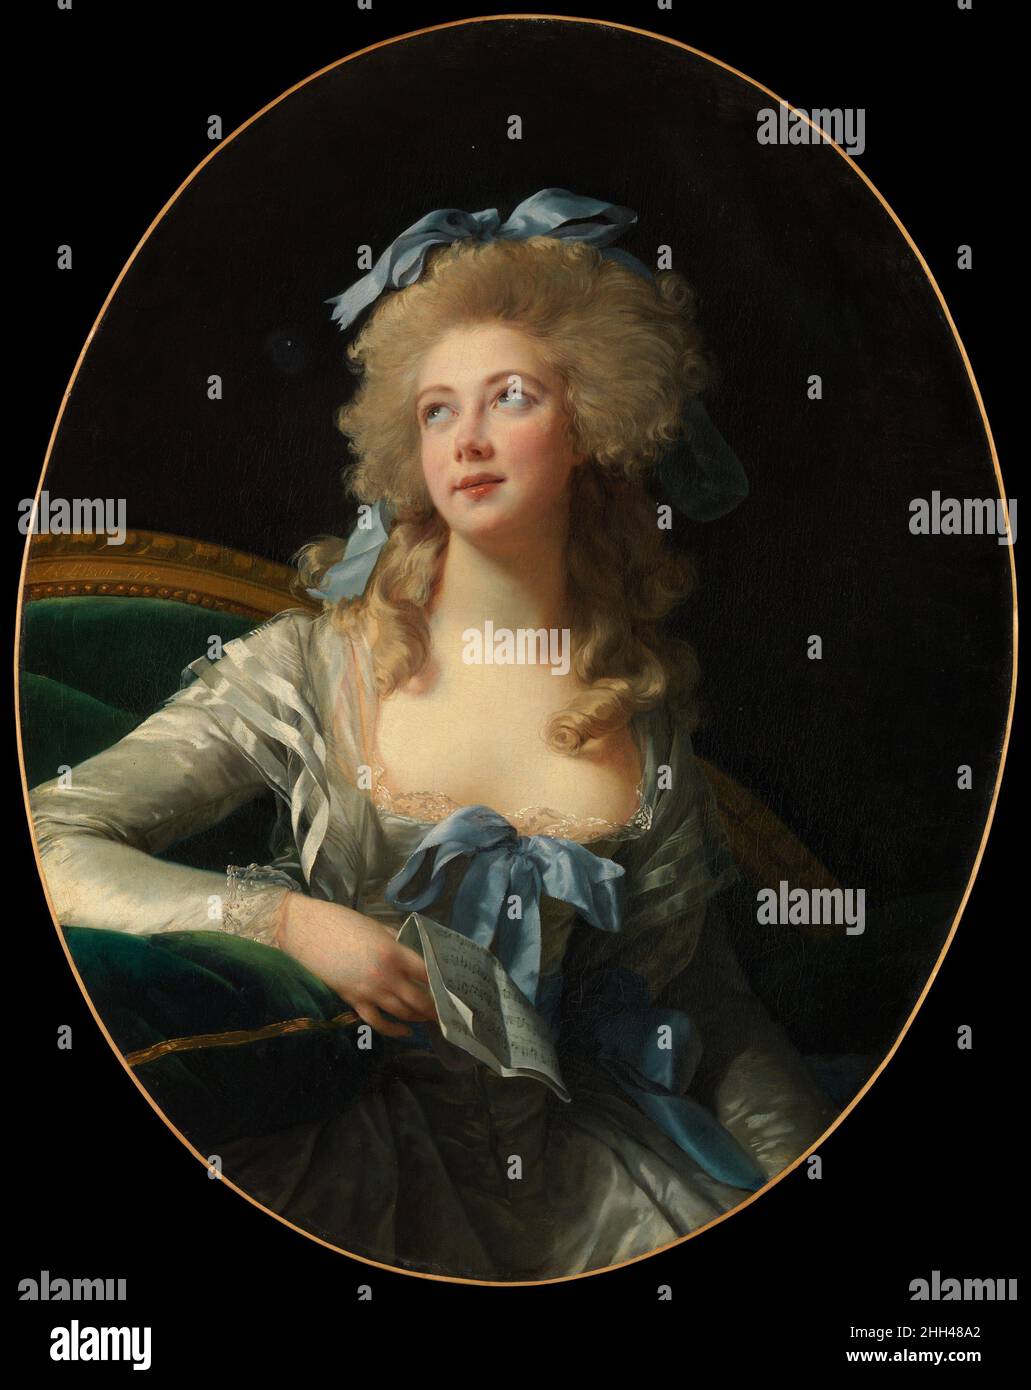 Madame Grand (Noël Catherine Vorlée, 1761–1835) 1783 Elisabeth Louise Vigée Le Brun French This is one of the most captivating works by Vigée Le Brun, the most important woman artist of her time. Marie Antoinette’s patronage aided Vigée Le Brun’s admission to the Académie Royale in 1783 as one of only four women members permitted. She sent three history paintings (an exceptional genre for a woman artist) and at least ten portraits (including this one) to that year’s Salon, which served as her public debut. Madame Grand was born to a French colonial family near Pondicherry, India, and as she ro Stock Photo